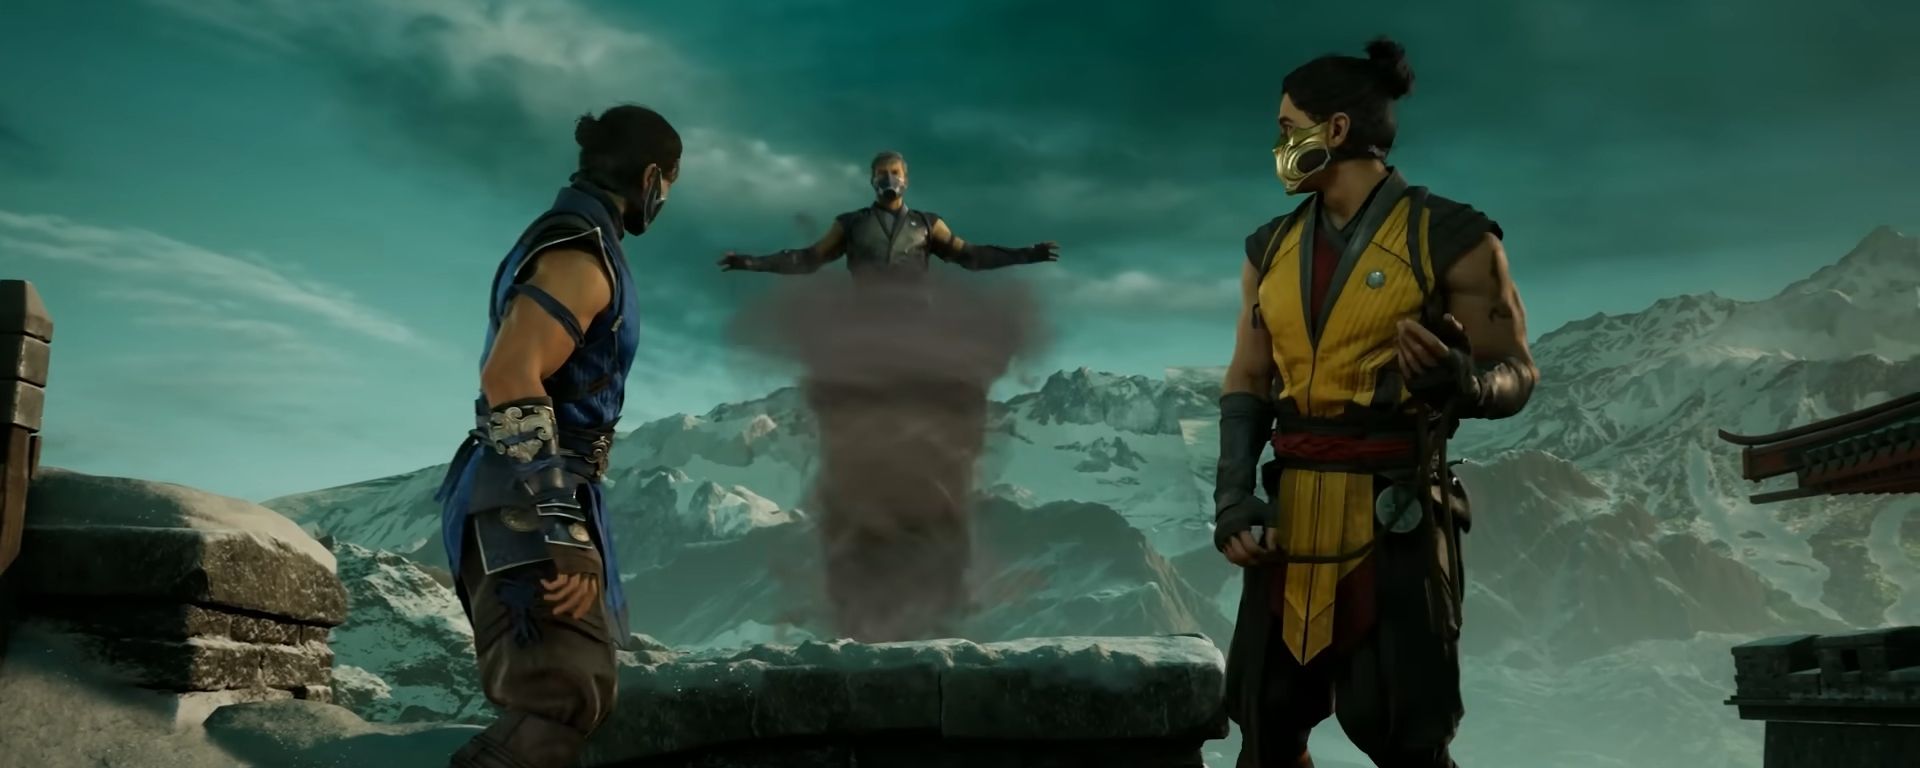 Mortal Kombat 1's Smoke appears coming out of a tornado while talking to Sub-Zero and Scorpion.